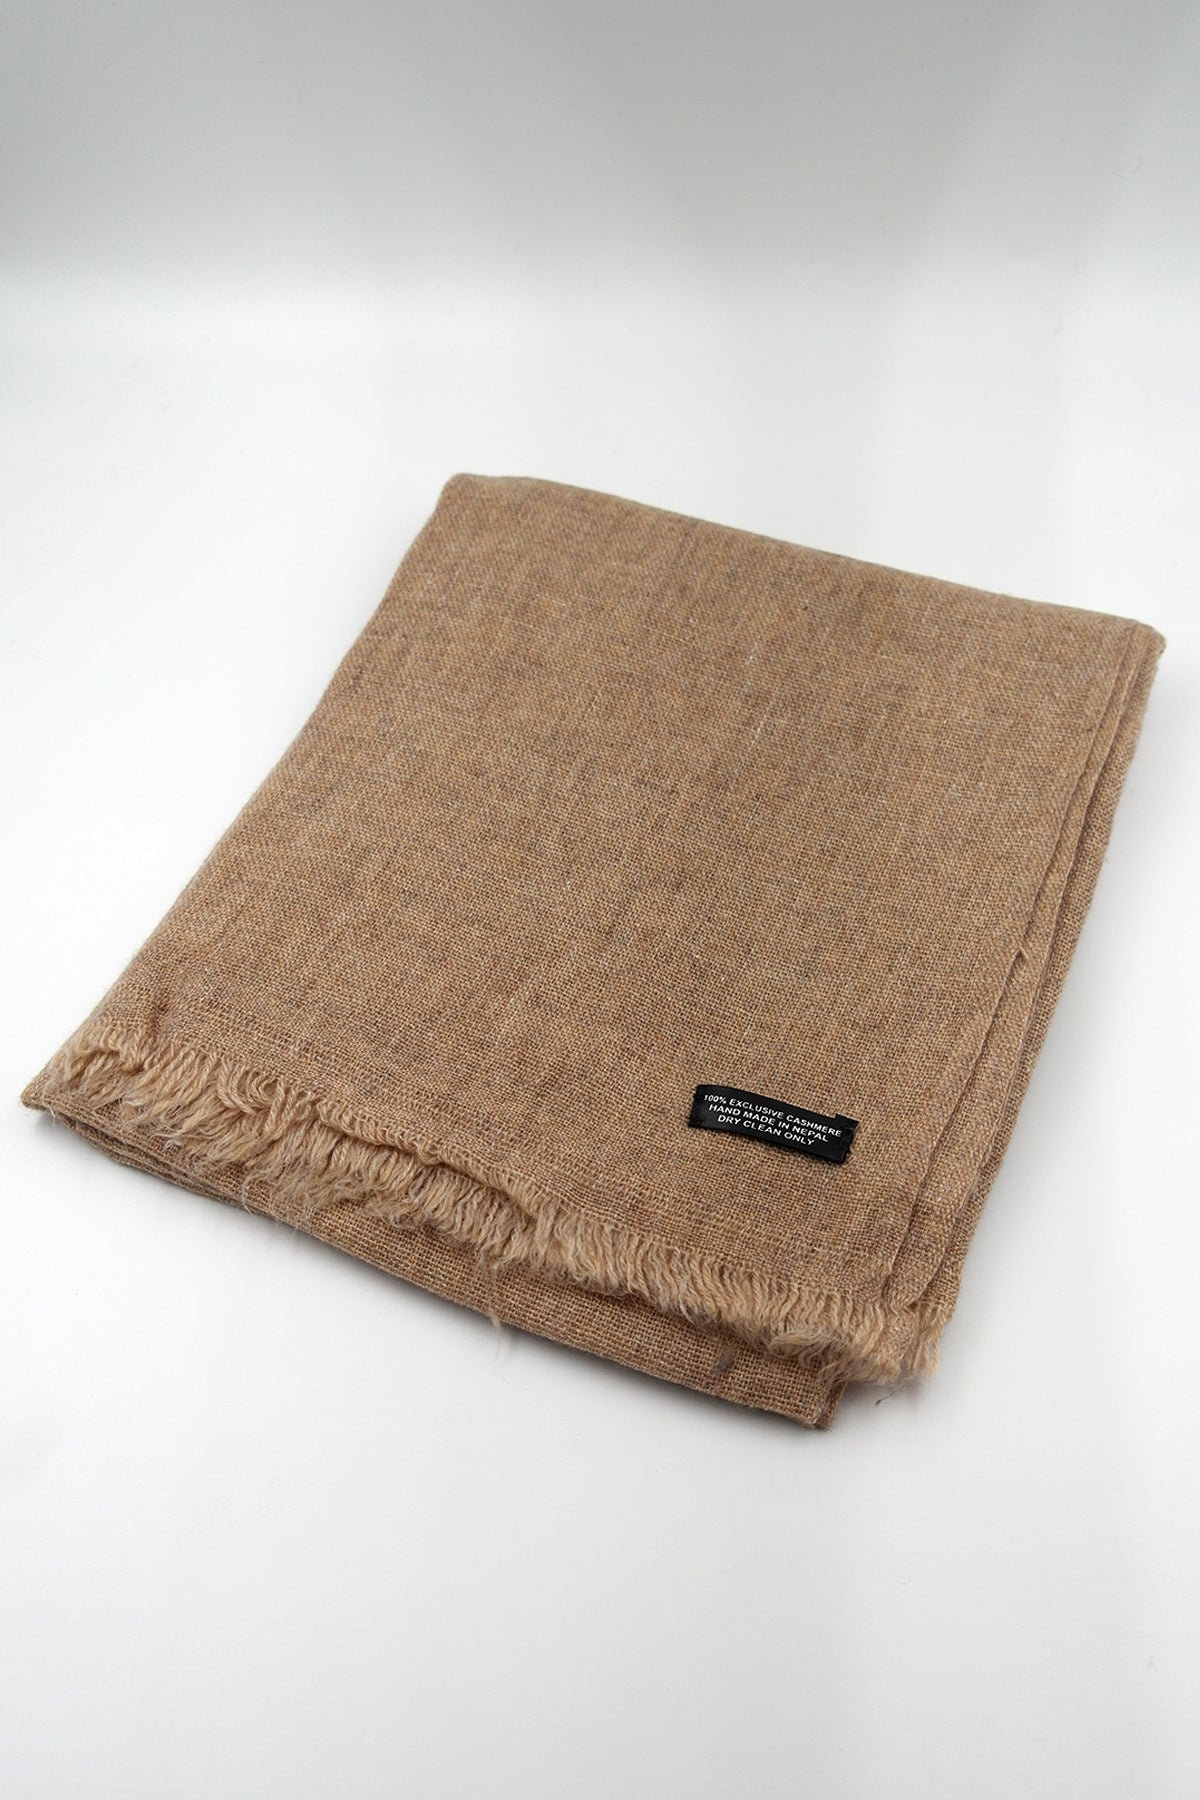 Light Brown Cashmere pashmina scarf for Women handloomed Shawl